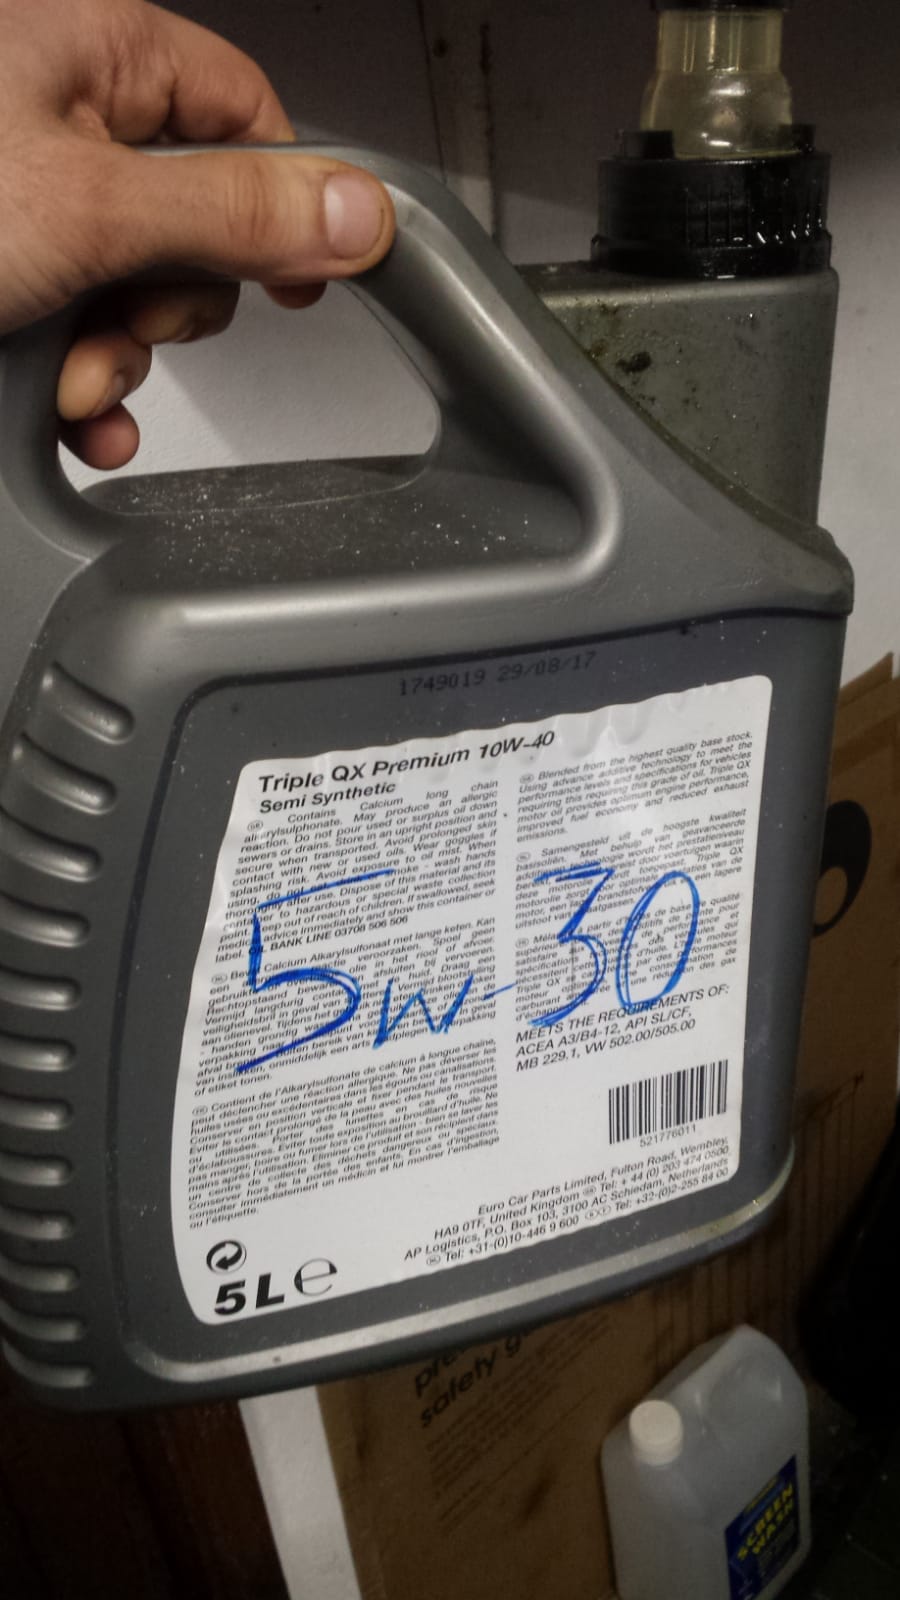 Pistonheads - The image shows a person's hand holding a plastic container labeled "5W-30". The label includes a barcode and some text, but the details are not fully visible. In front of the container, there is a white piece of paper with black lettering indicating that the oil should not be mixed with gasoline. The setting appears to be an indoor environment, possibly a garage or workshop, suggested by the presence of a cardboard box and what looks like a cleaning product in the background.